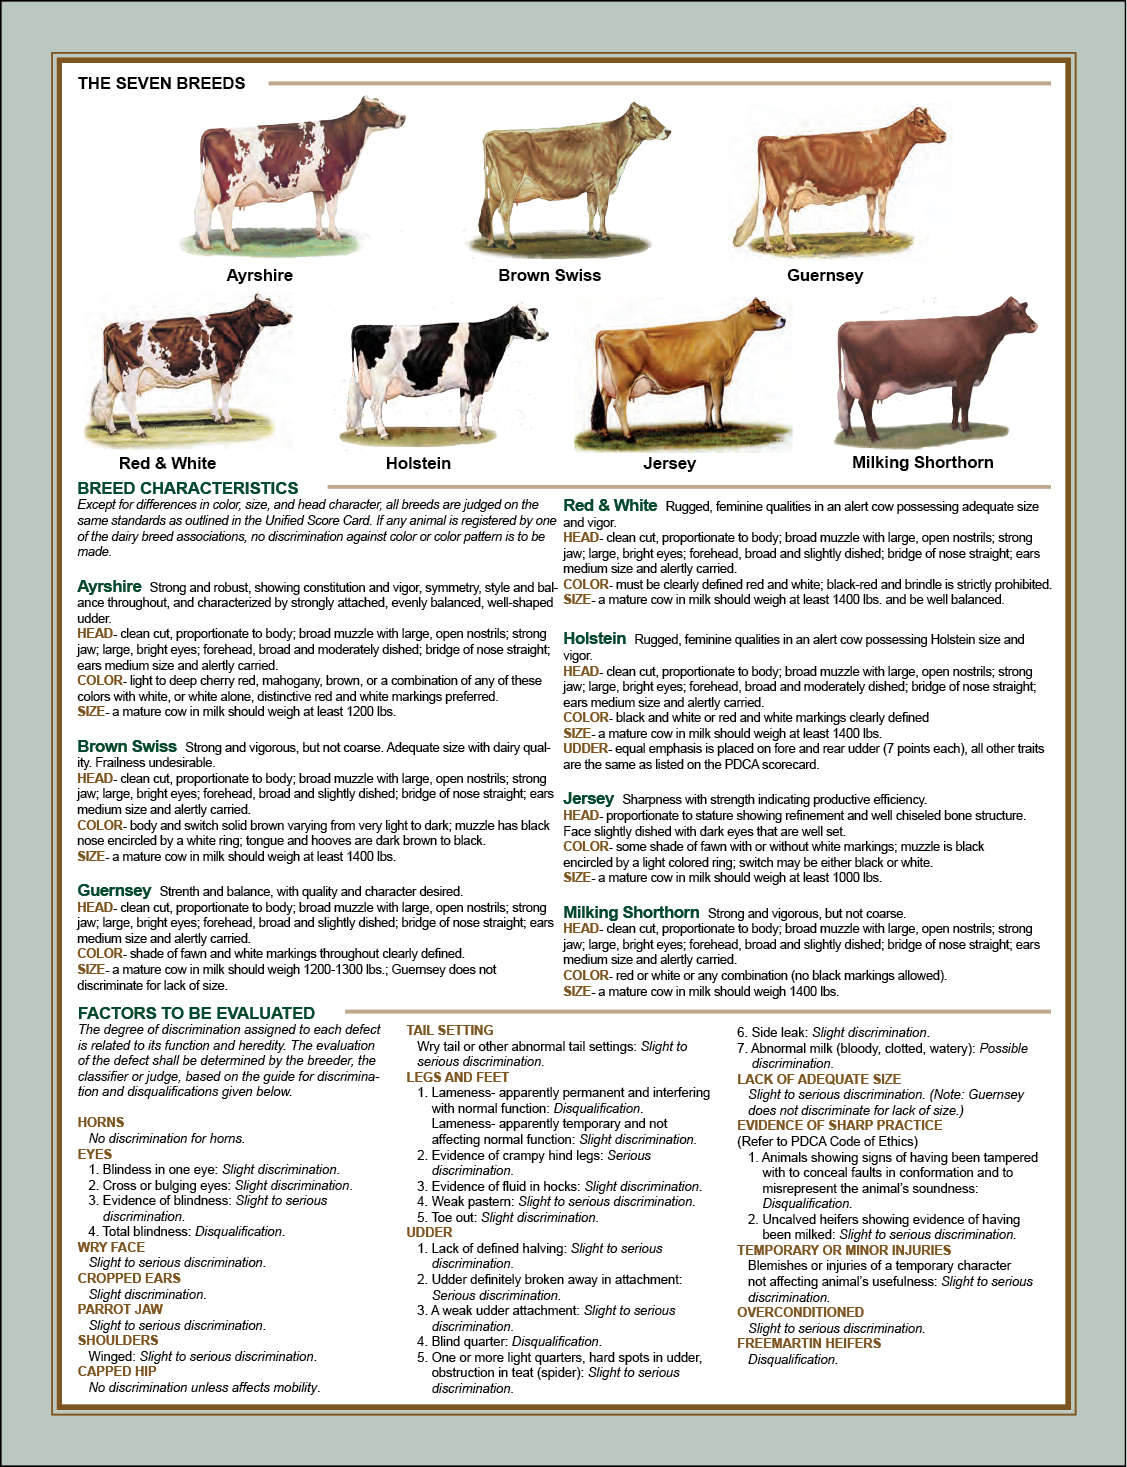 The seven breeds of cows are explained.